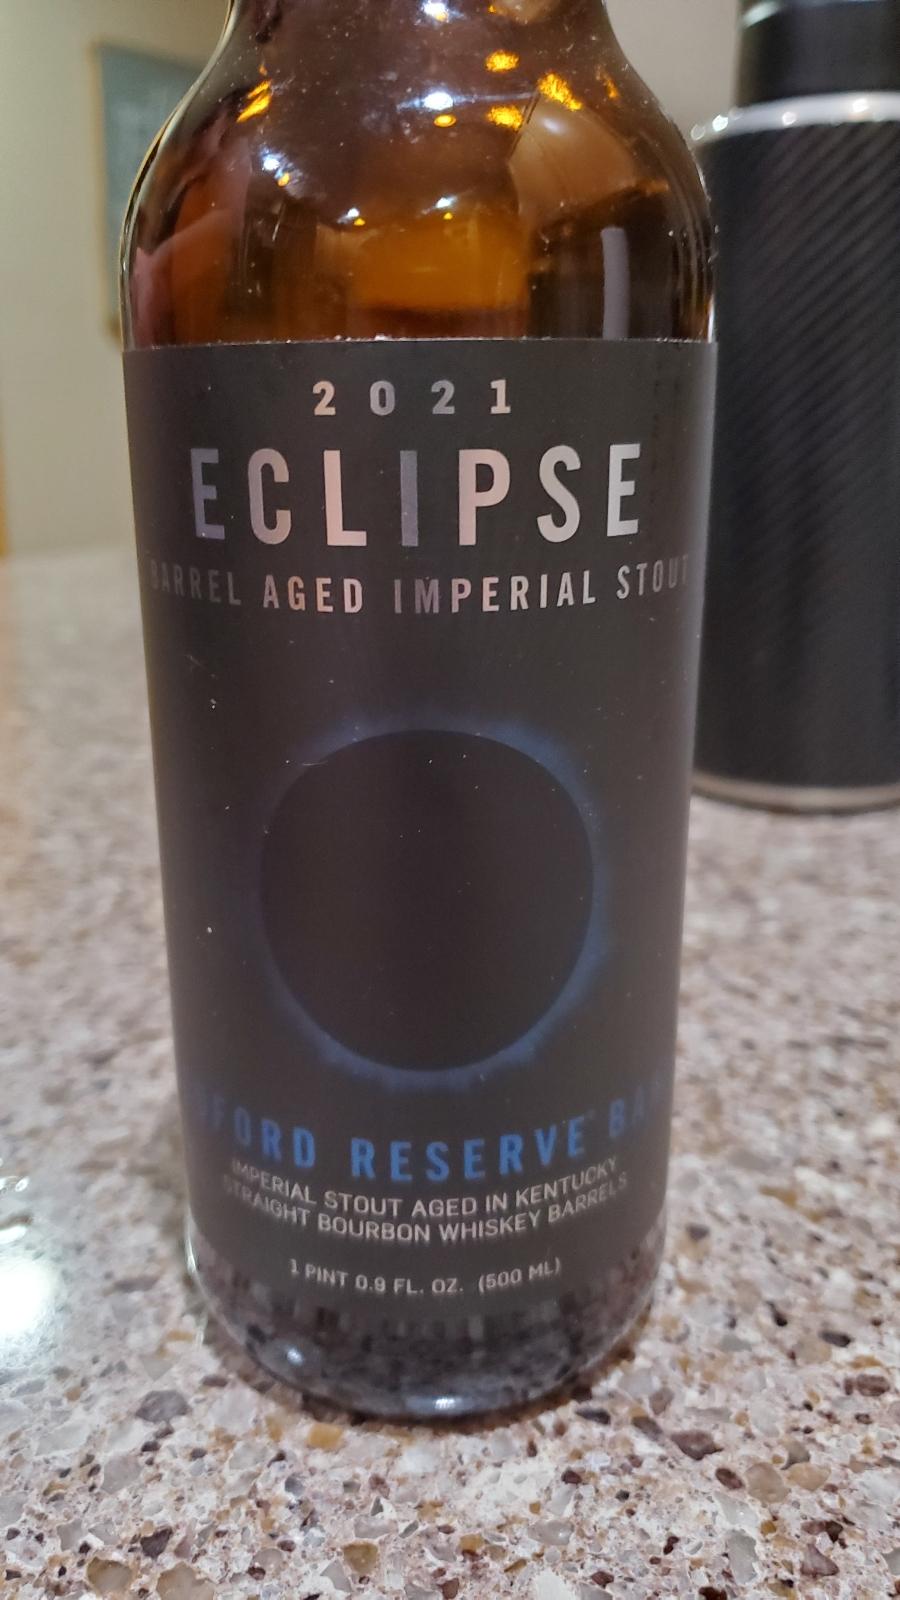 Eclipse Imperial Stout - 2021 Woodford Reserve